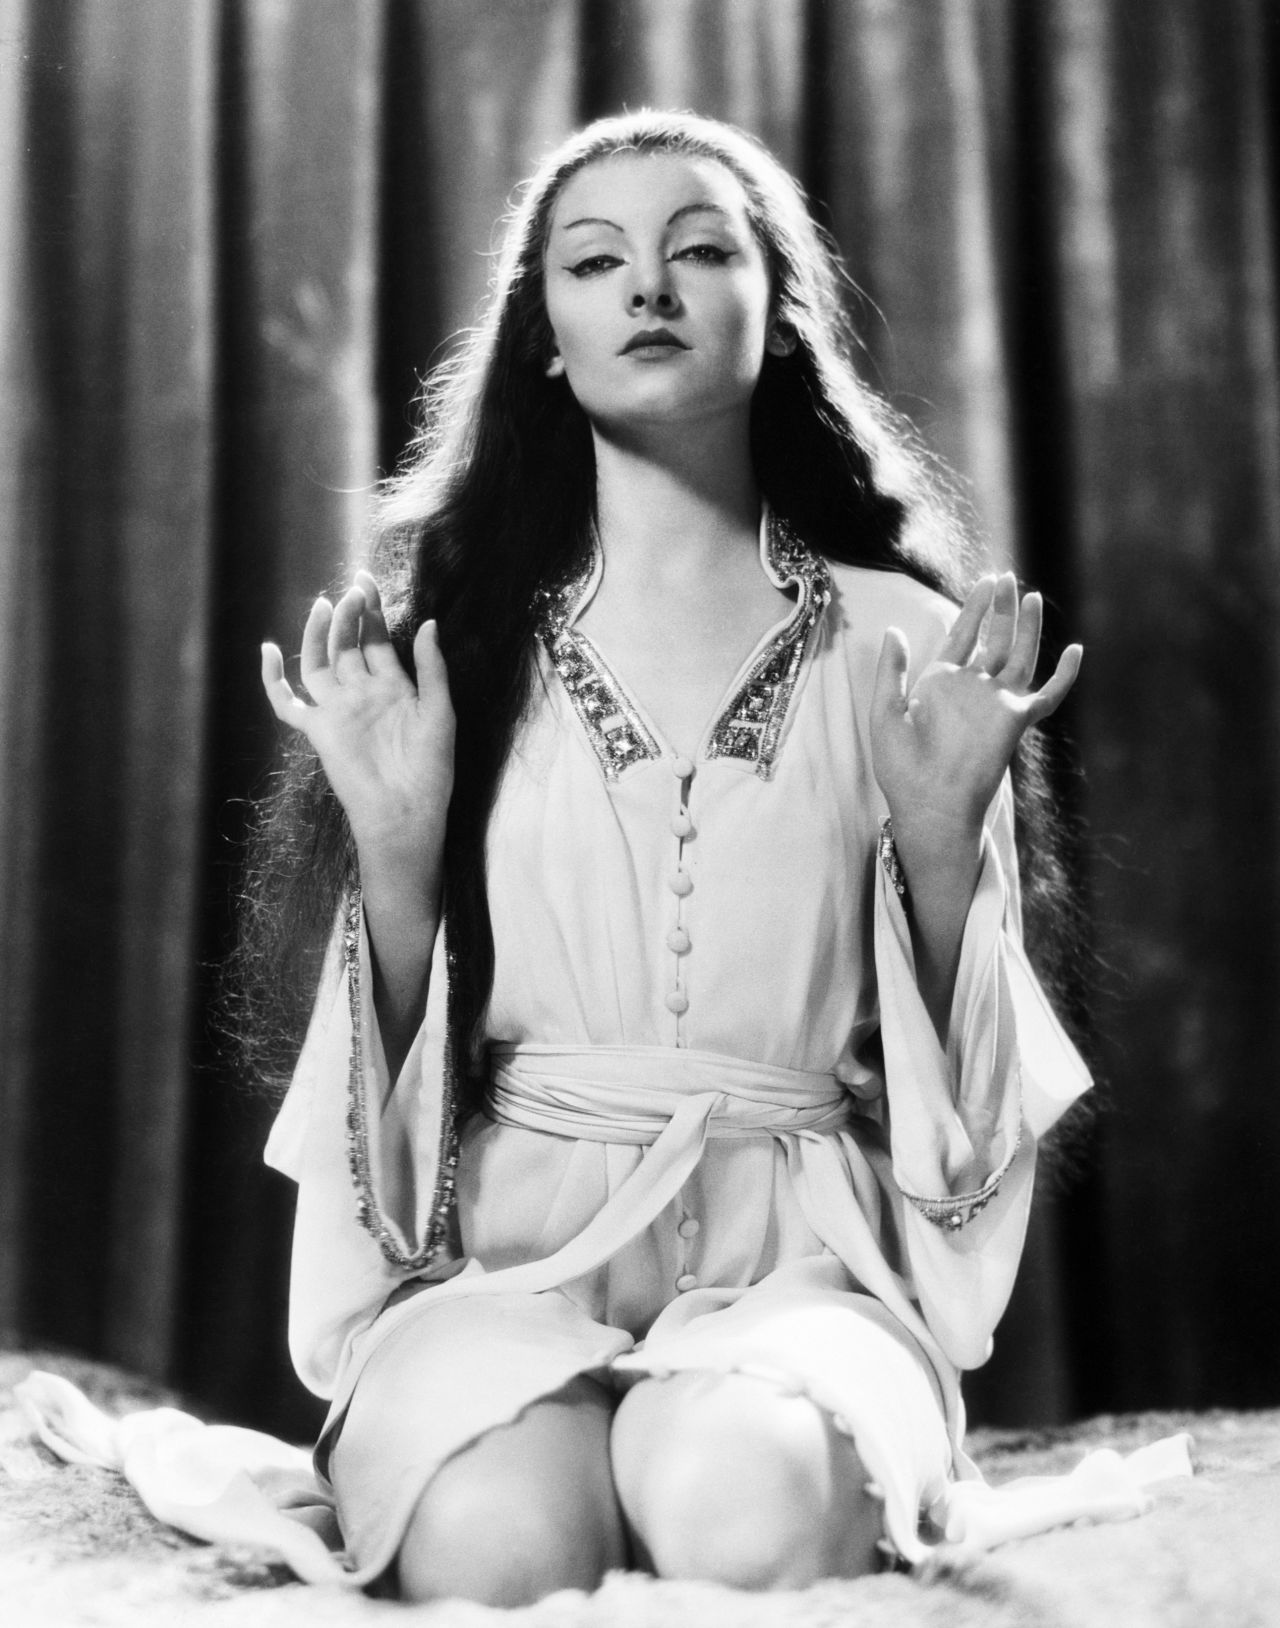 Myrna Loy, a White actress, portrayed the depraved daughter of Fu Manchu in "The Mask of Fu Manchu" (1932). 